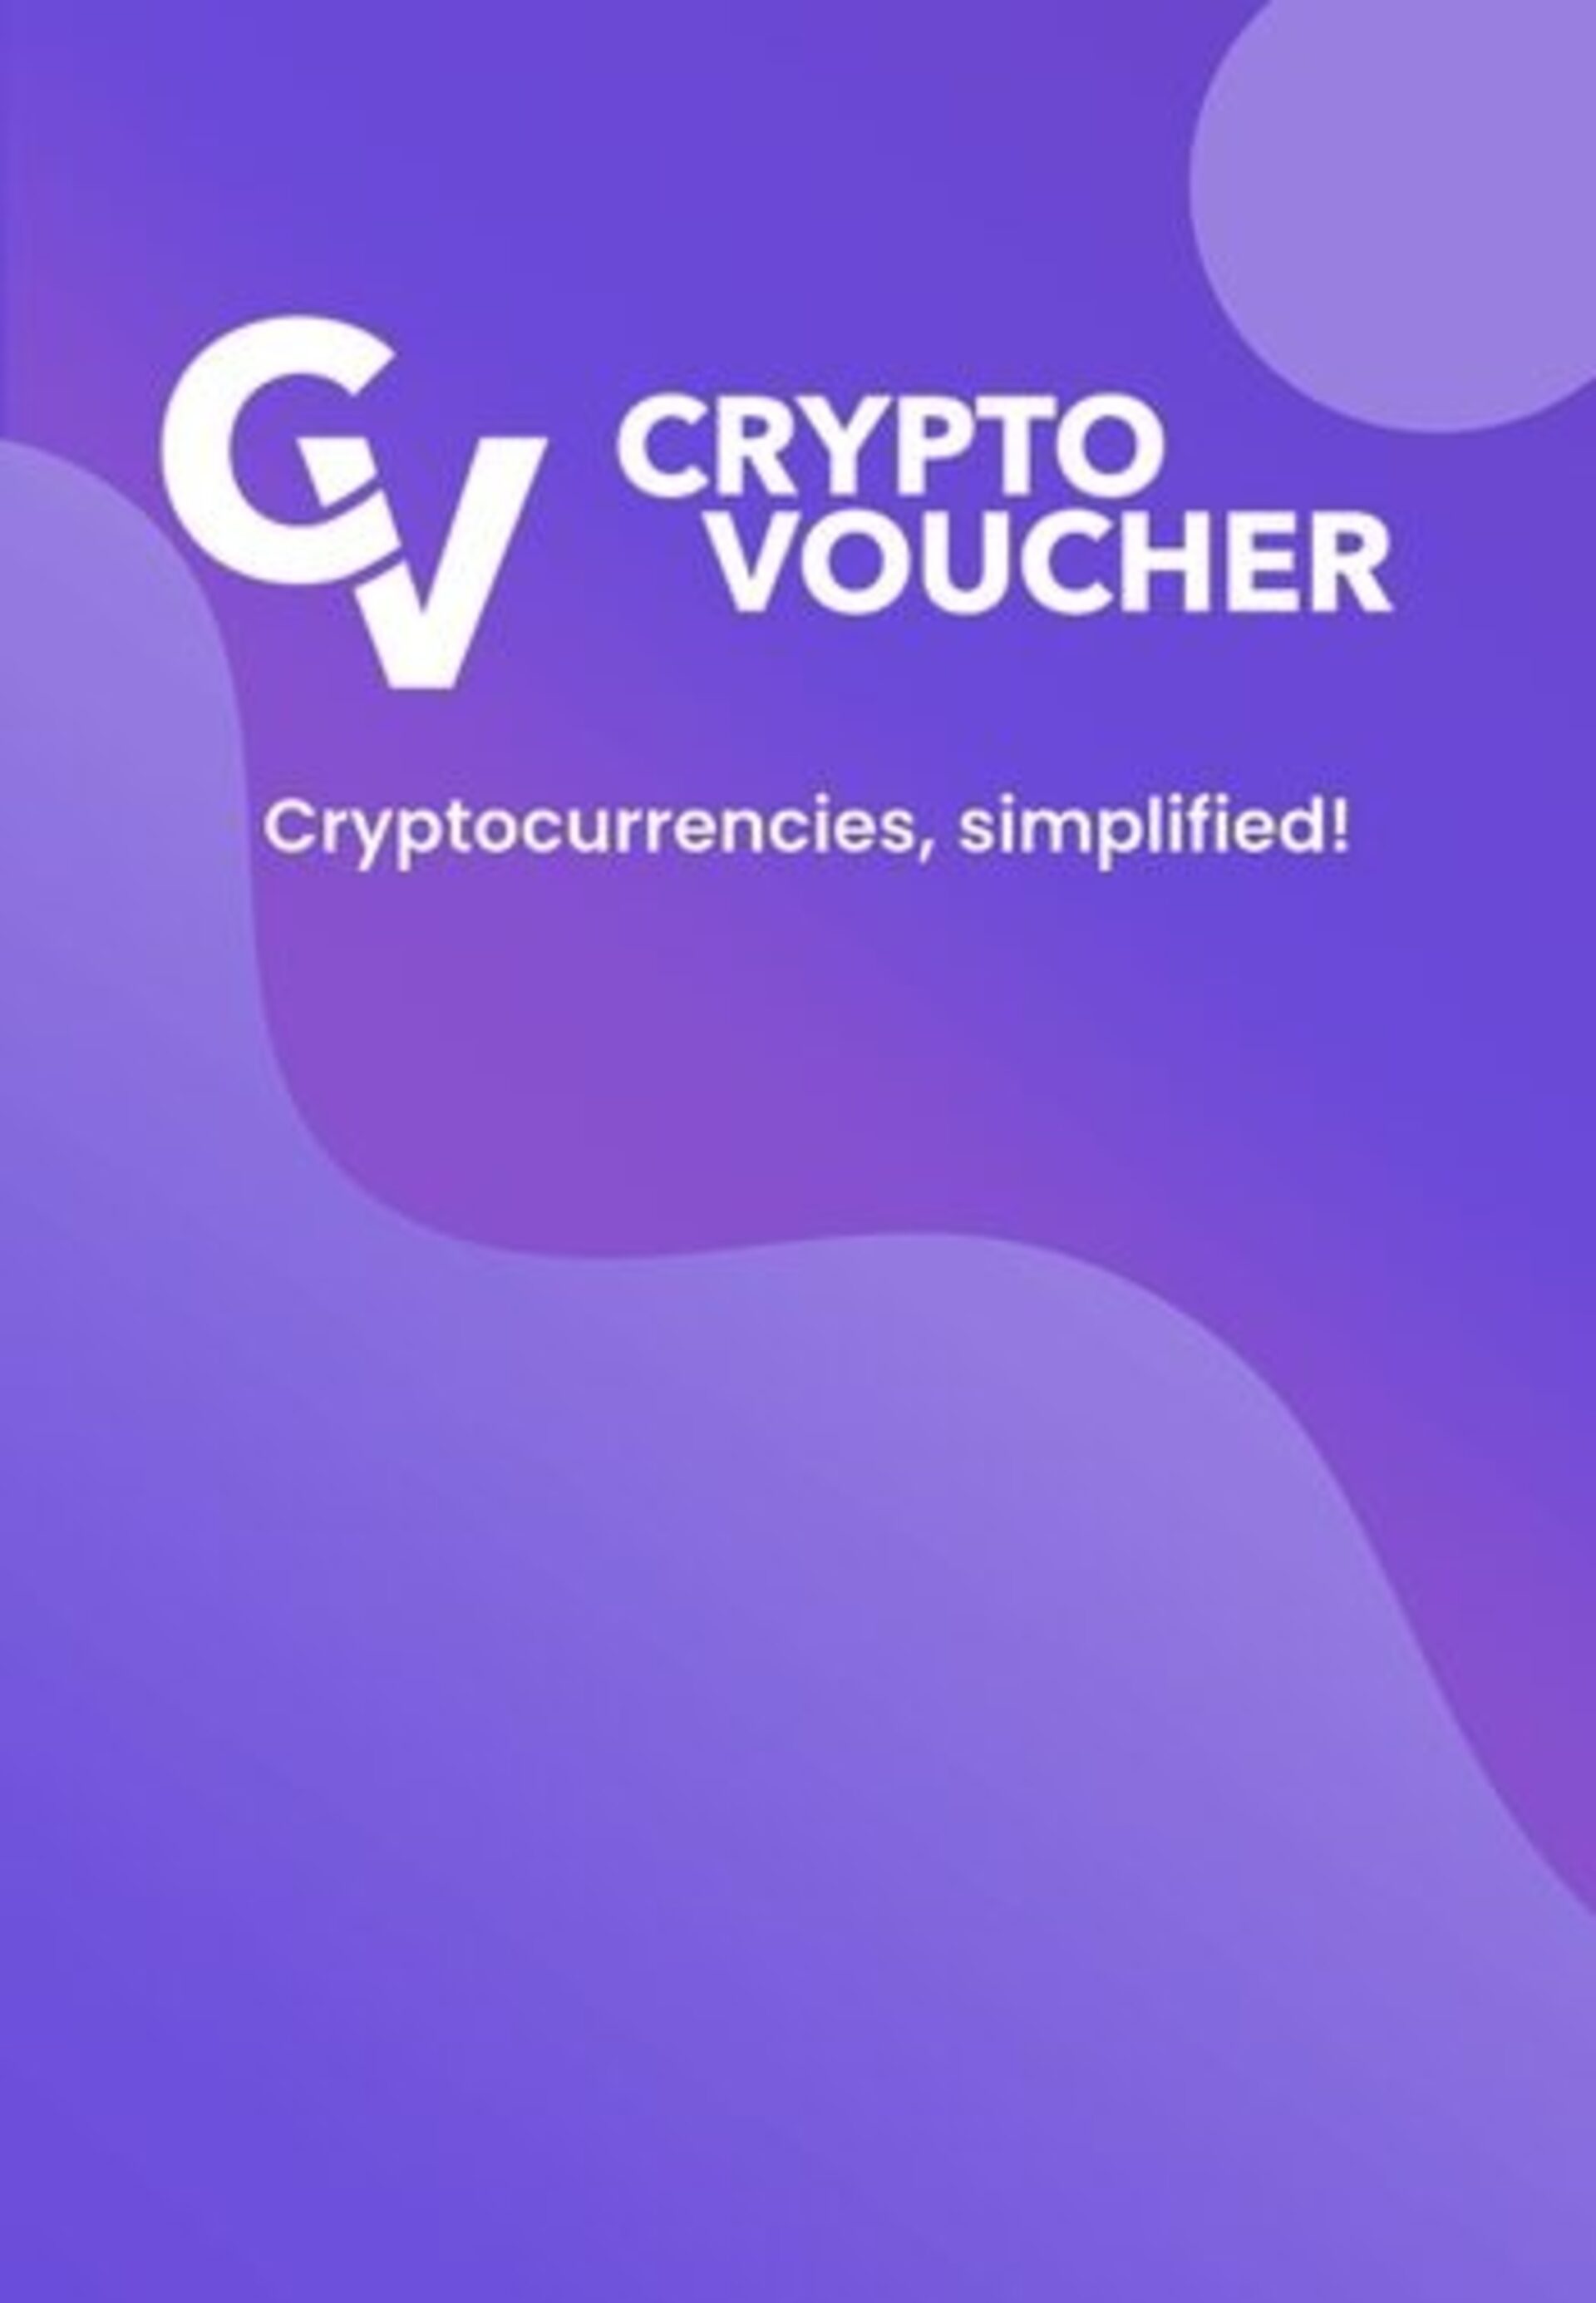 Codego - The Fast and Secure Way to Send Crypto Gift Cards